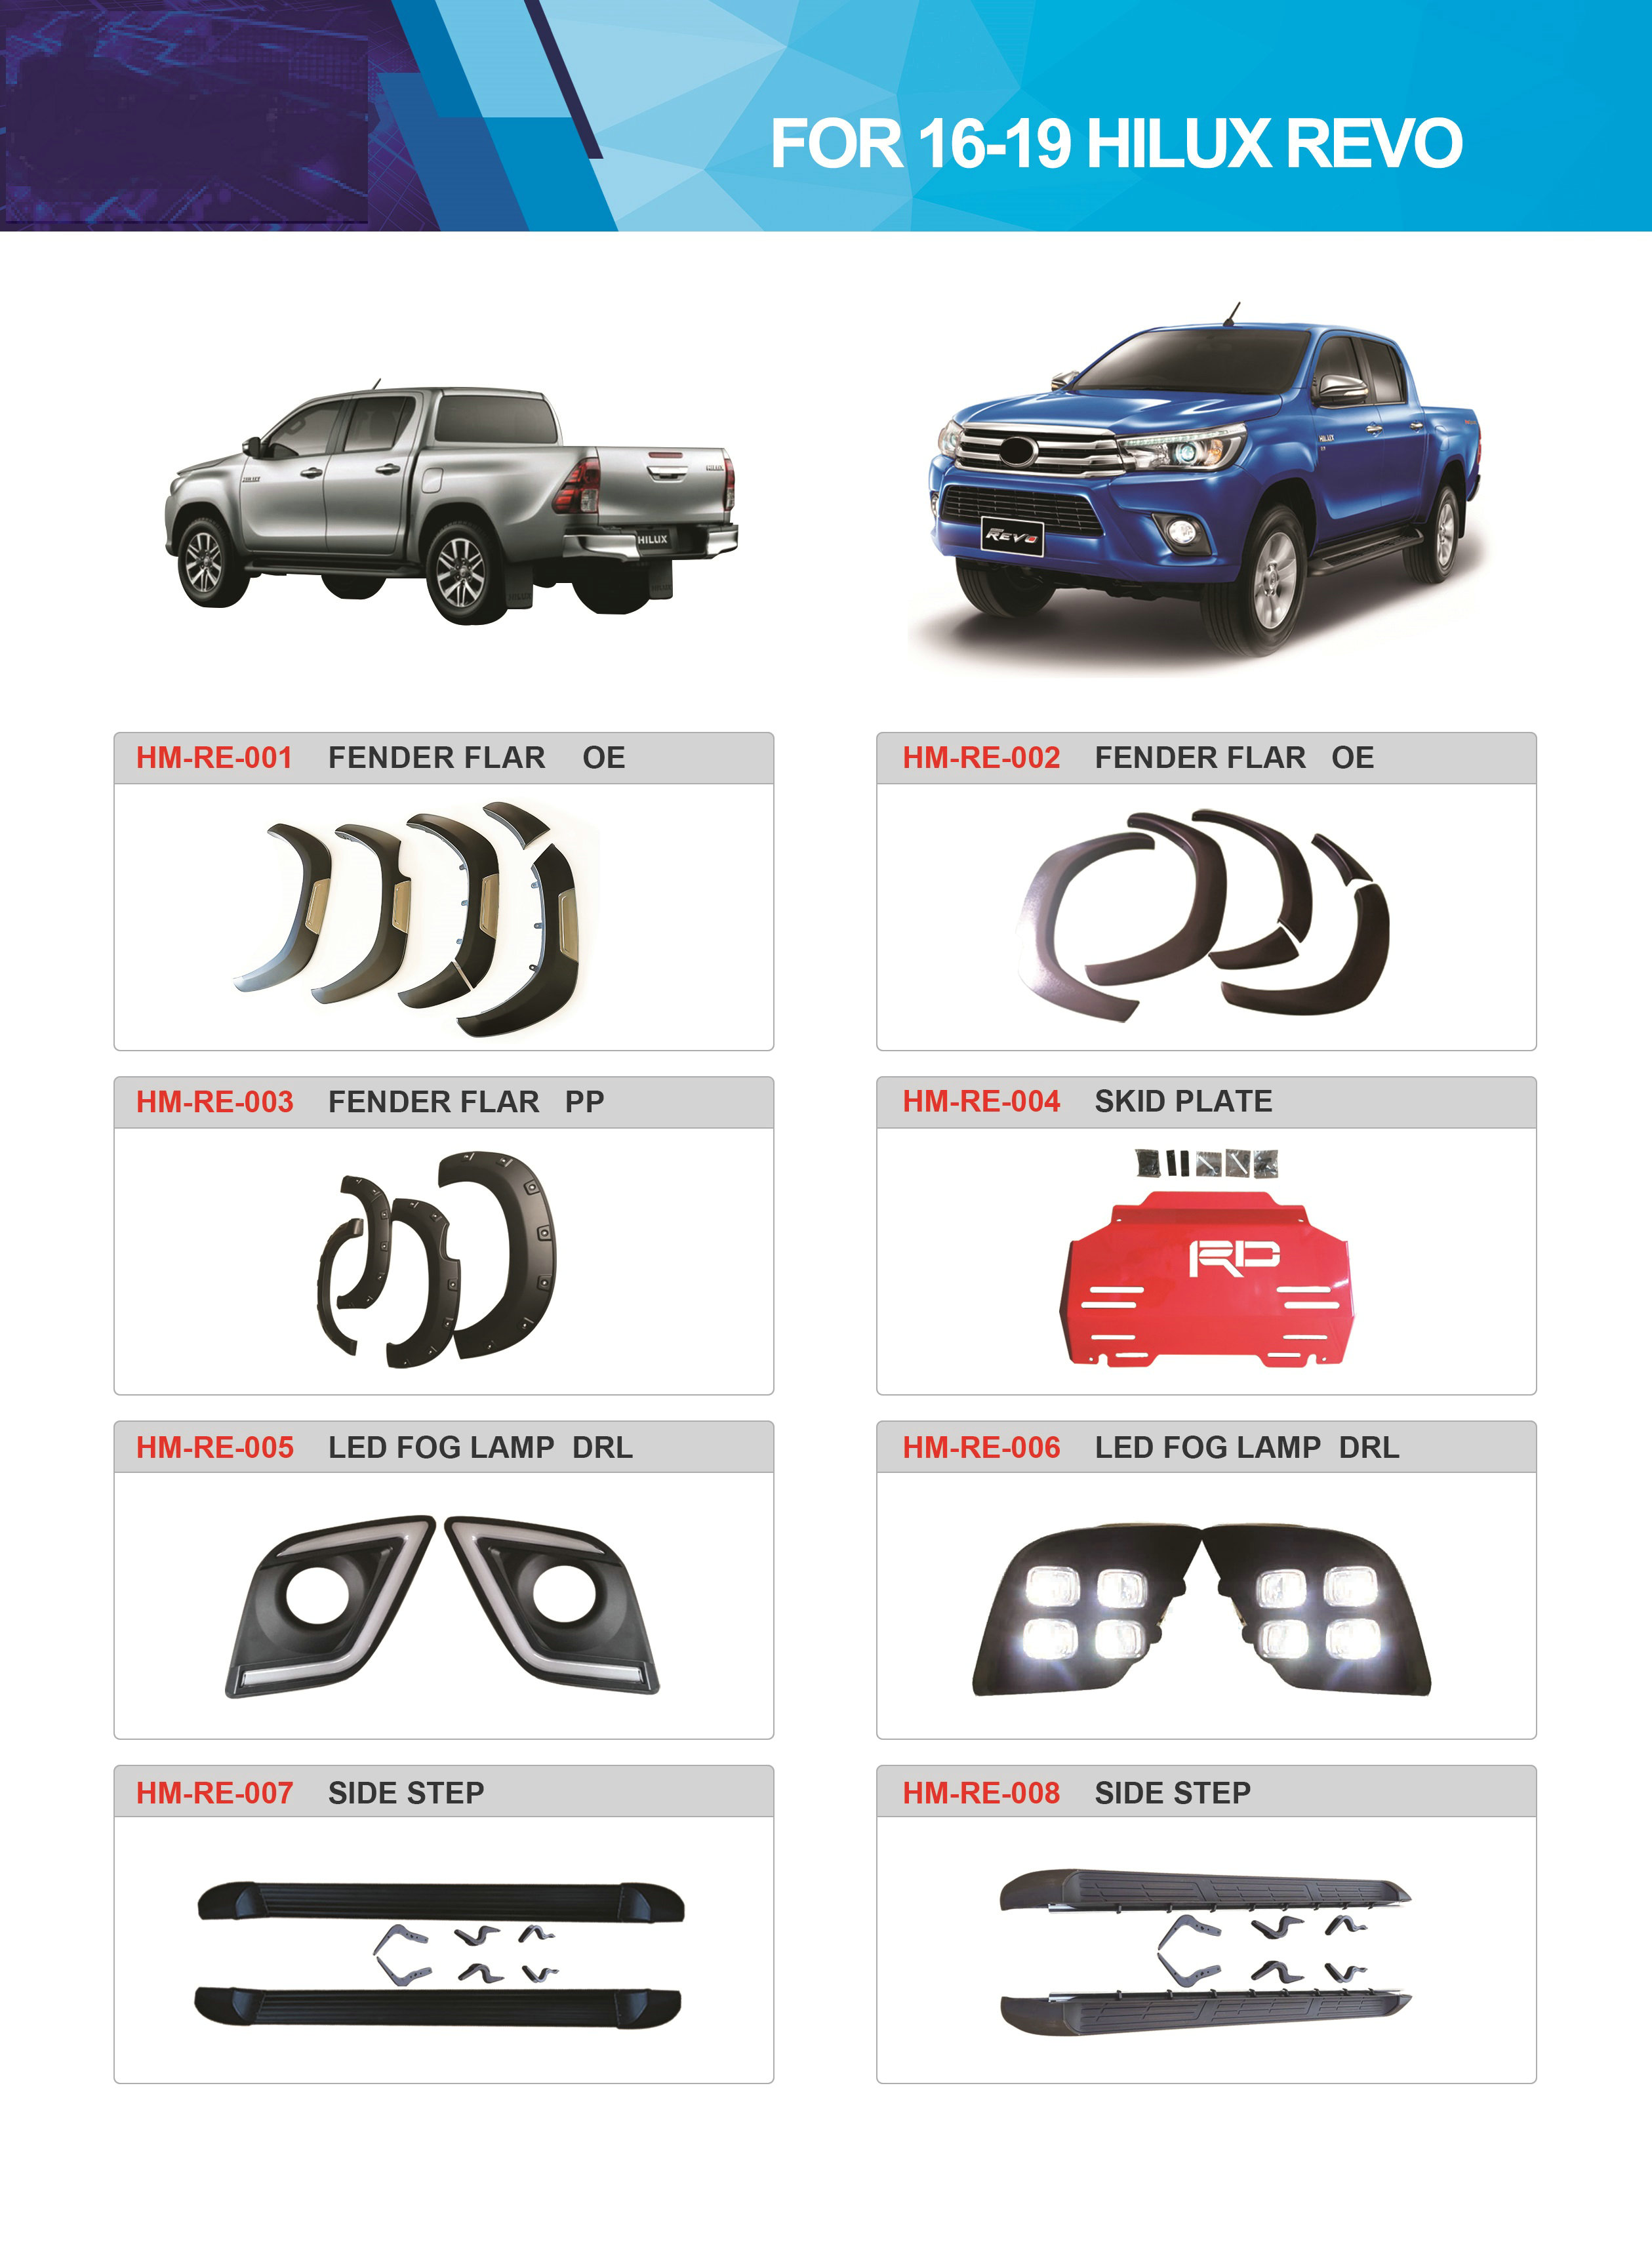 16-19 Hilux Revo Featured Image